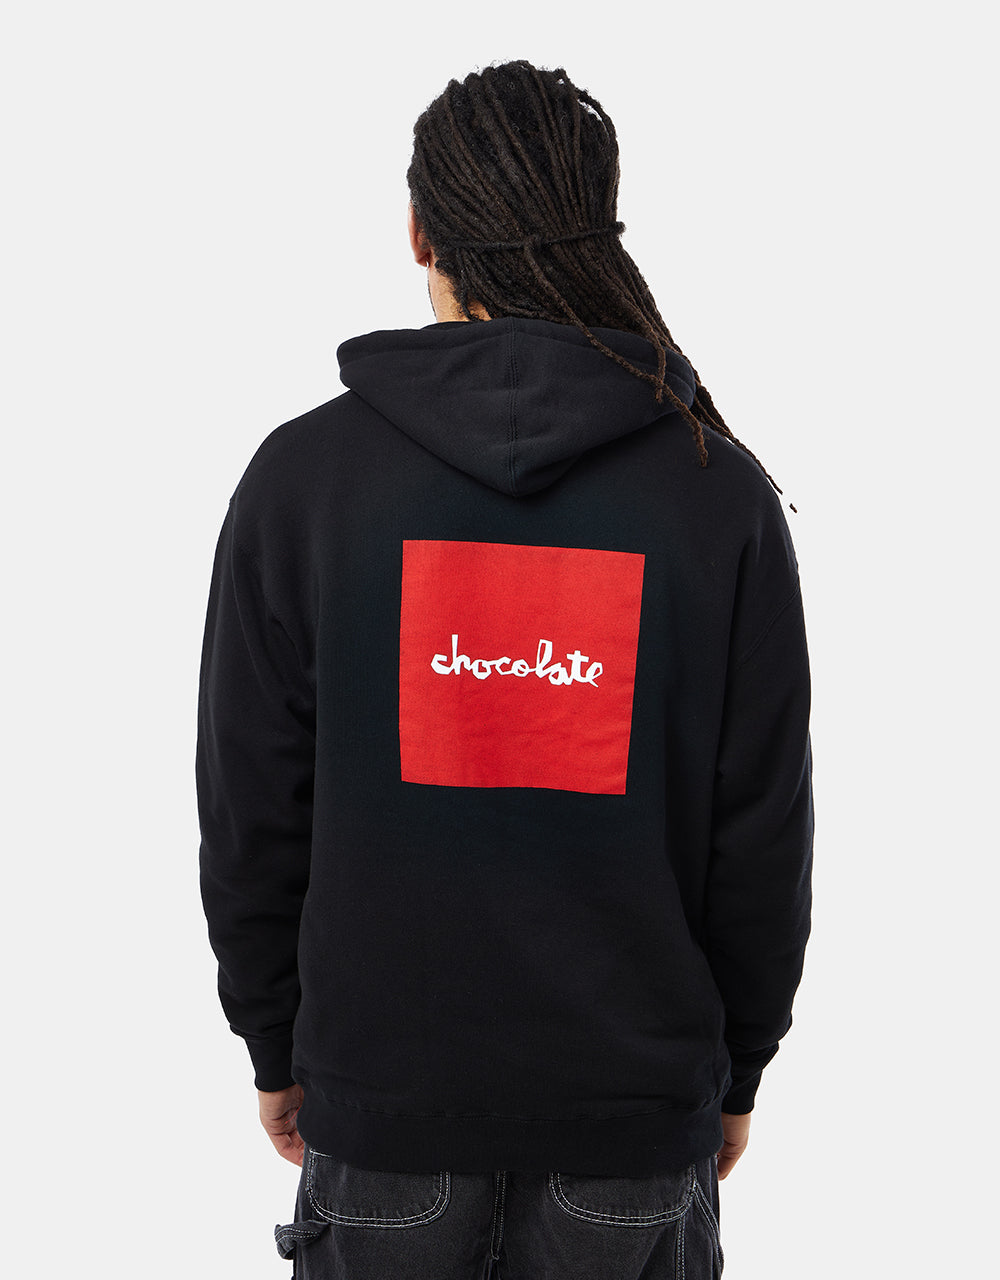 Chocolate Chunk Square Pullover Hoodie - Black